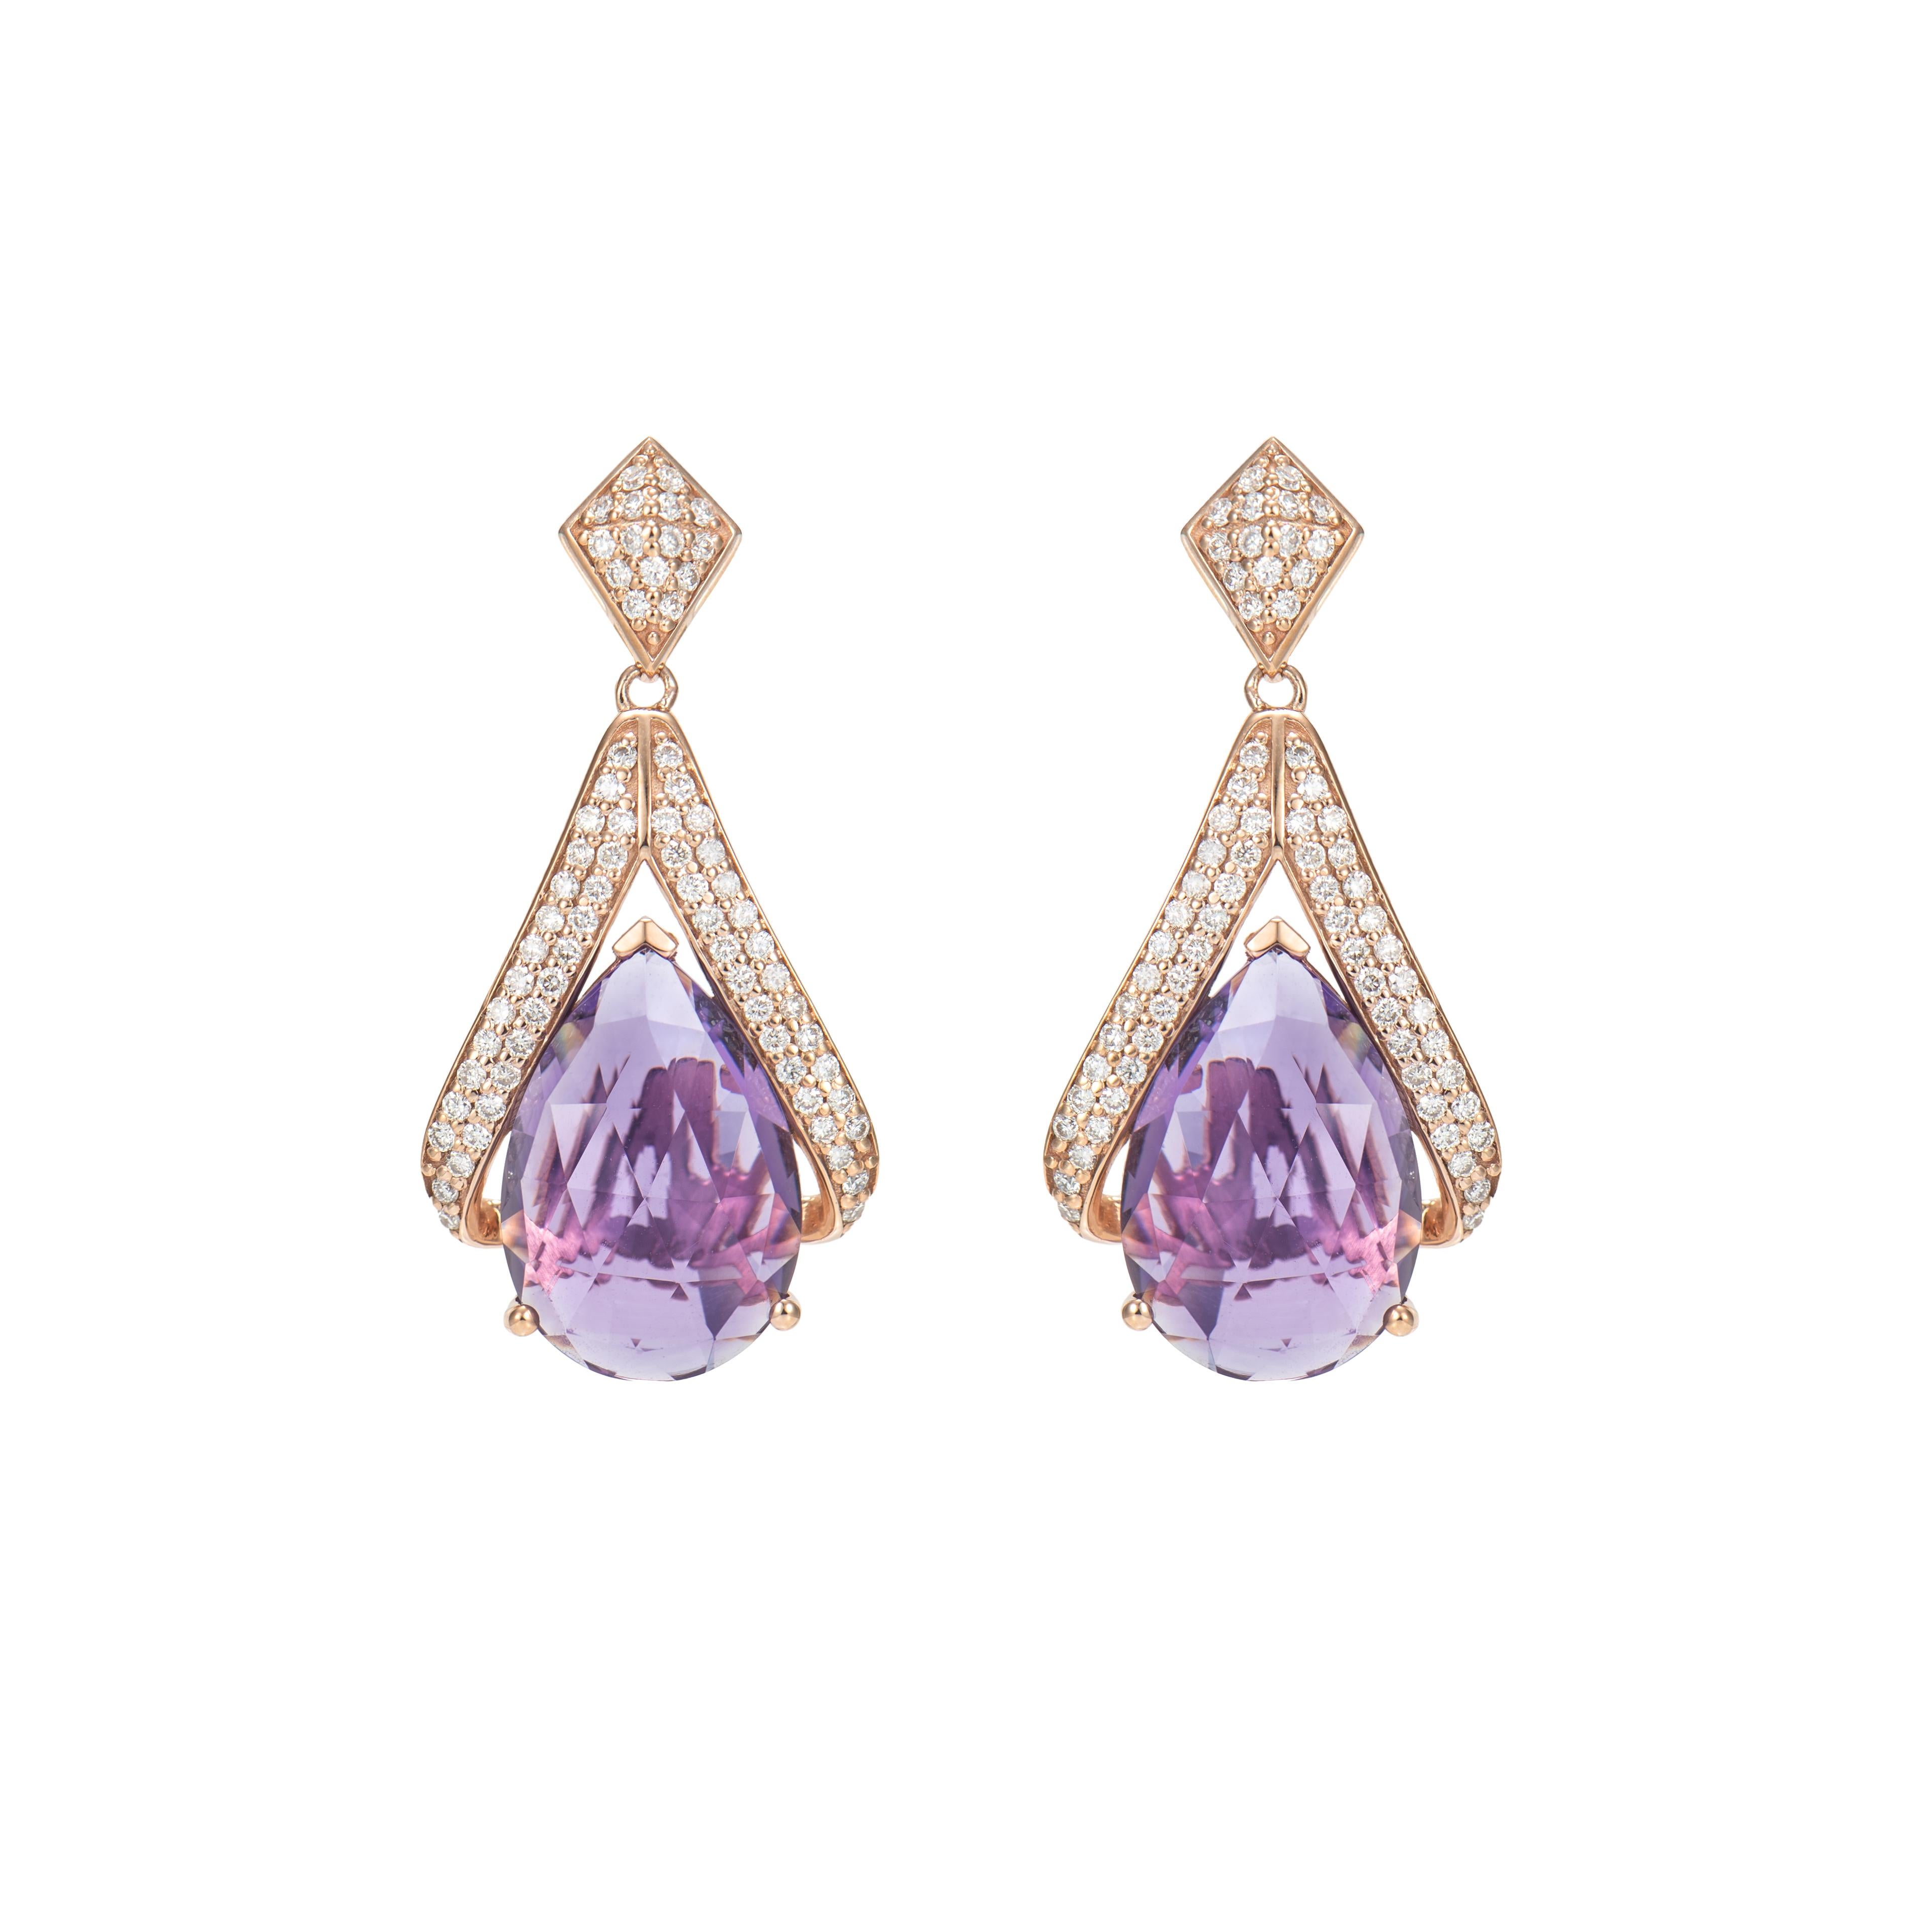 Pear Cut Amethyst Drop Earring in 18 Karat Rose Gold with White Diamond. For Sale